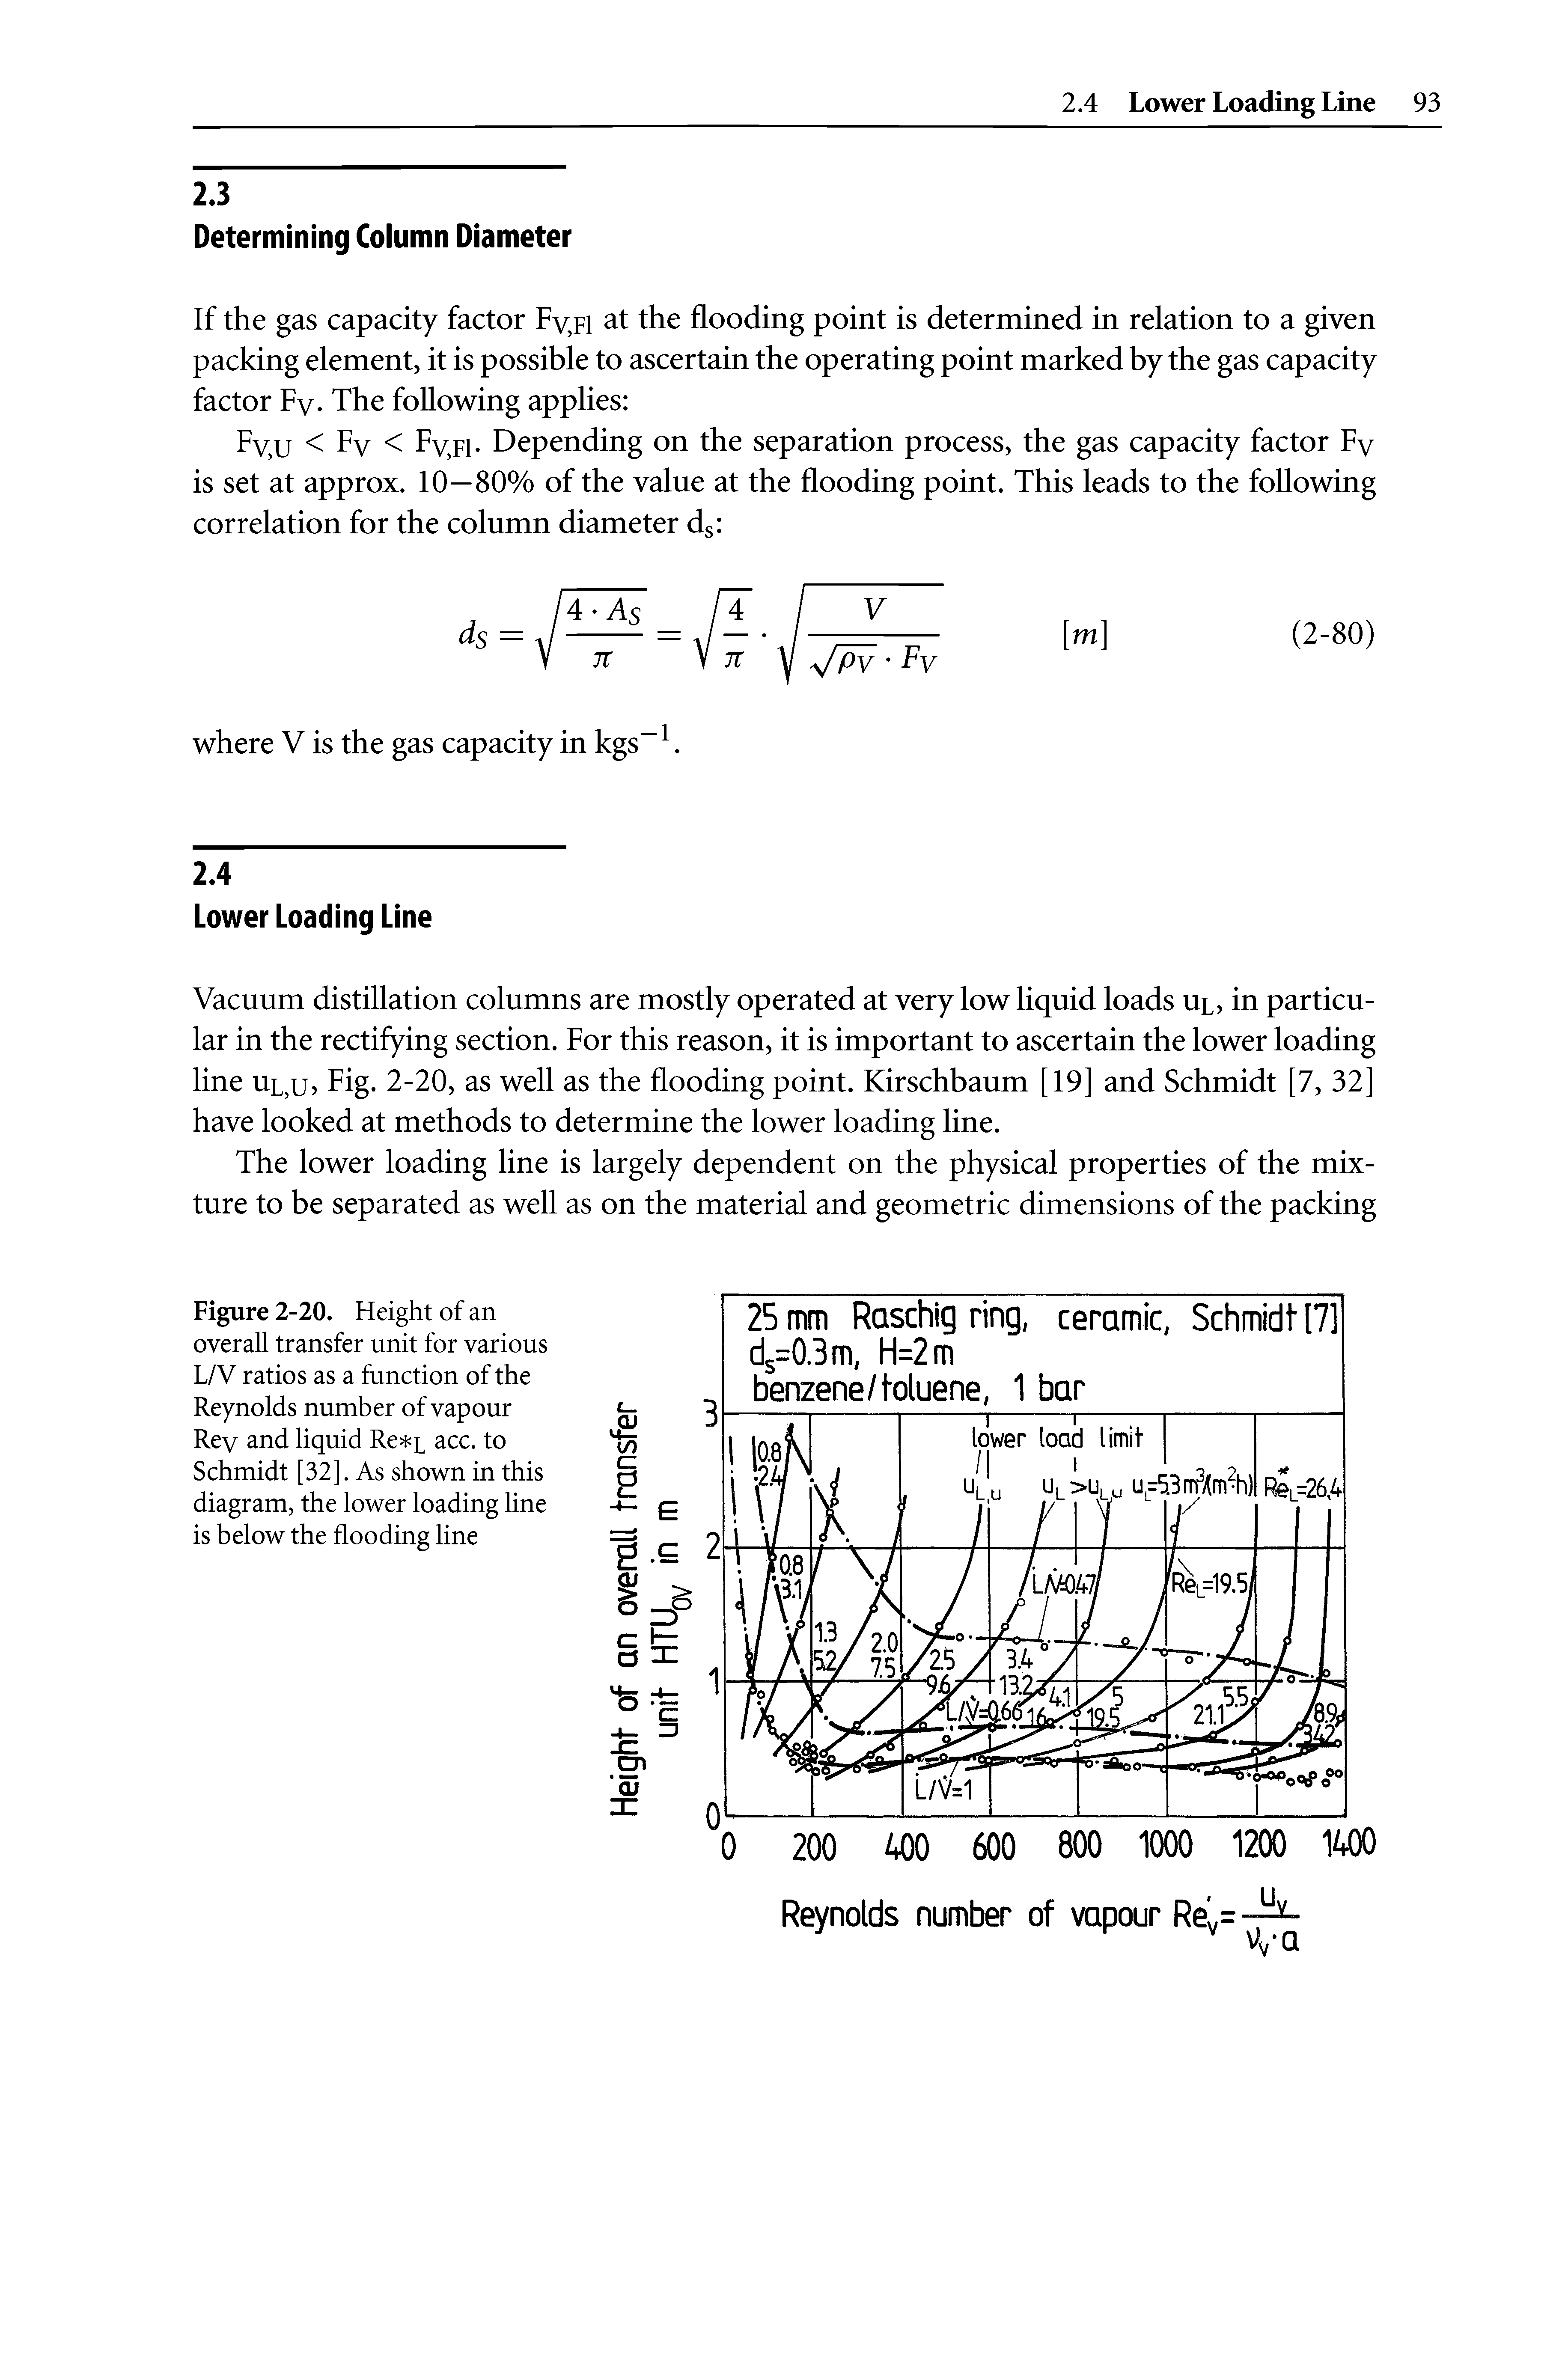 Figure 2-20. Height of an overall transfer unit for various L/V ratios as a function of the Reynolds number of vapour Rey and liquid Re L acc. to Schmidt [32]. As shown in this diagram, the lower loading line is below the flooding line...